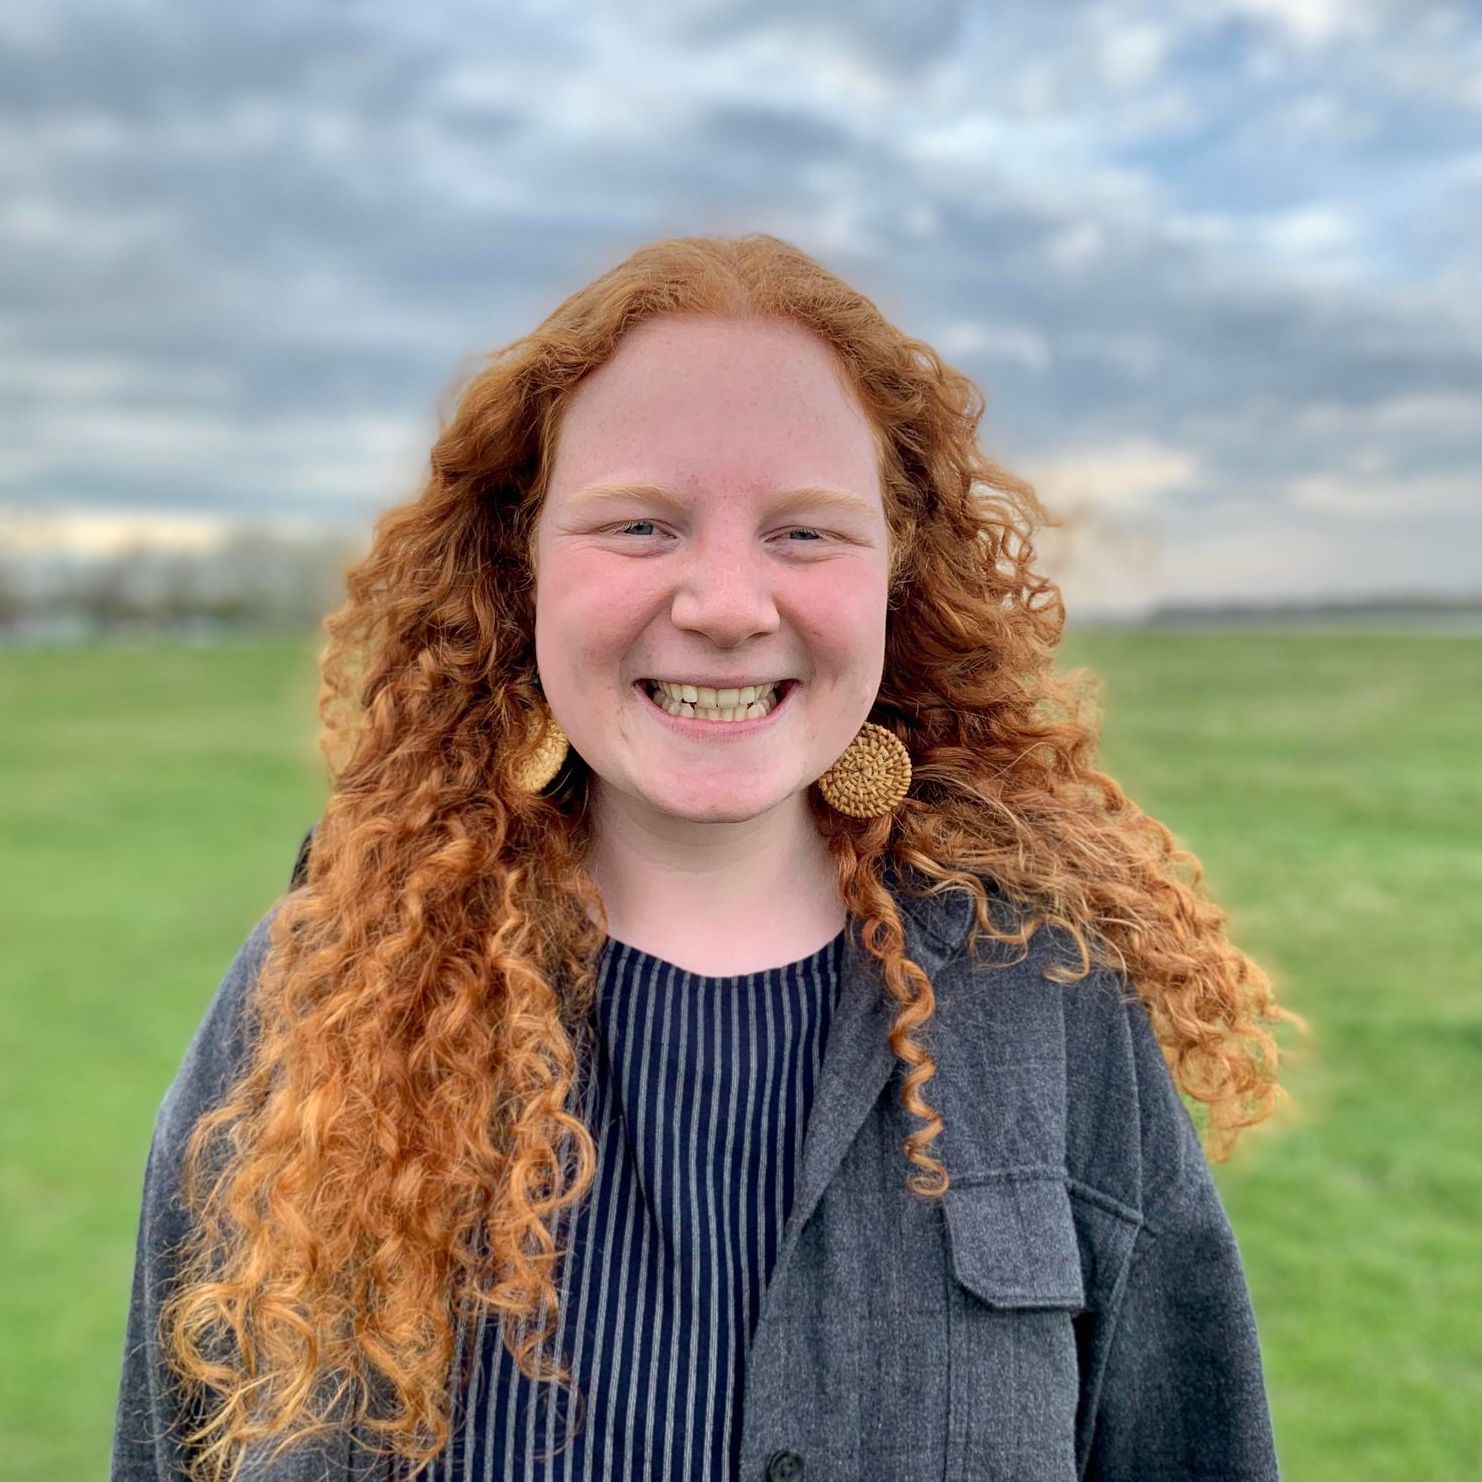 A woman smiling with long red curly hair with a grey striped sweater standing in a grassy field